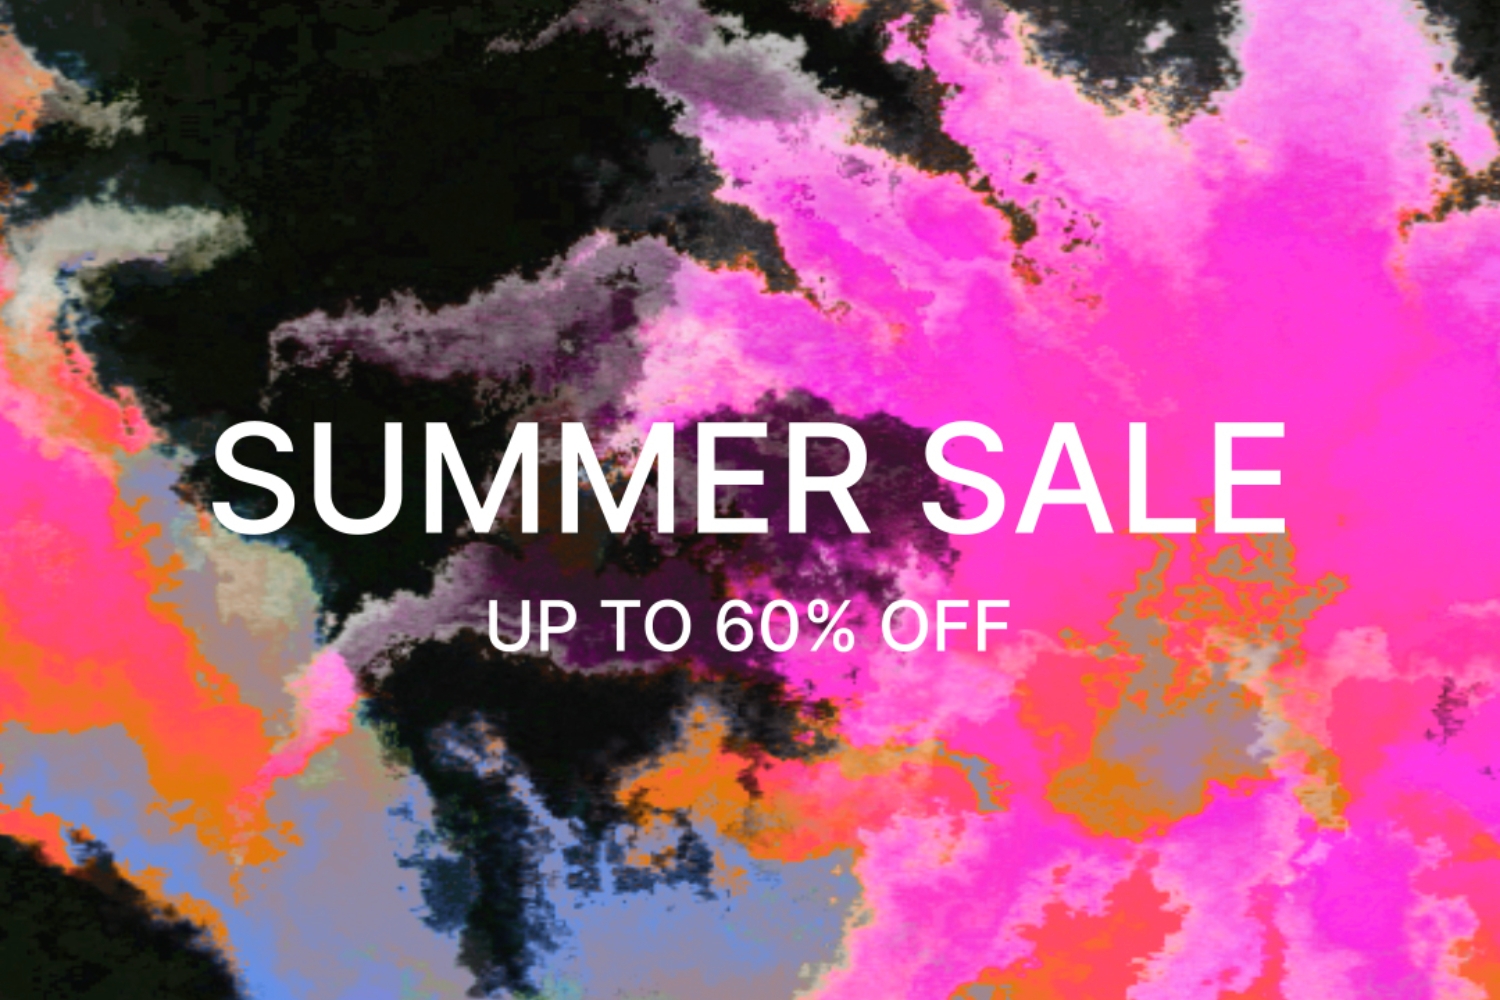 Check some steals from the Footdistrict Summer Sale with up to 60% off